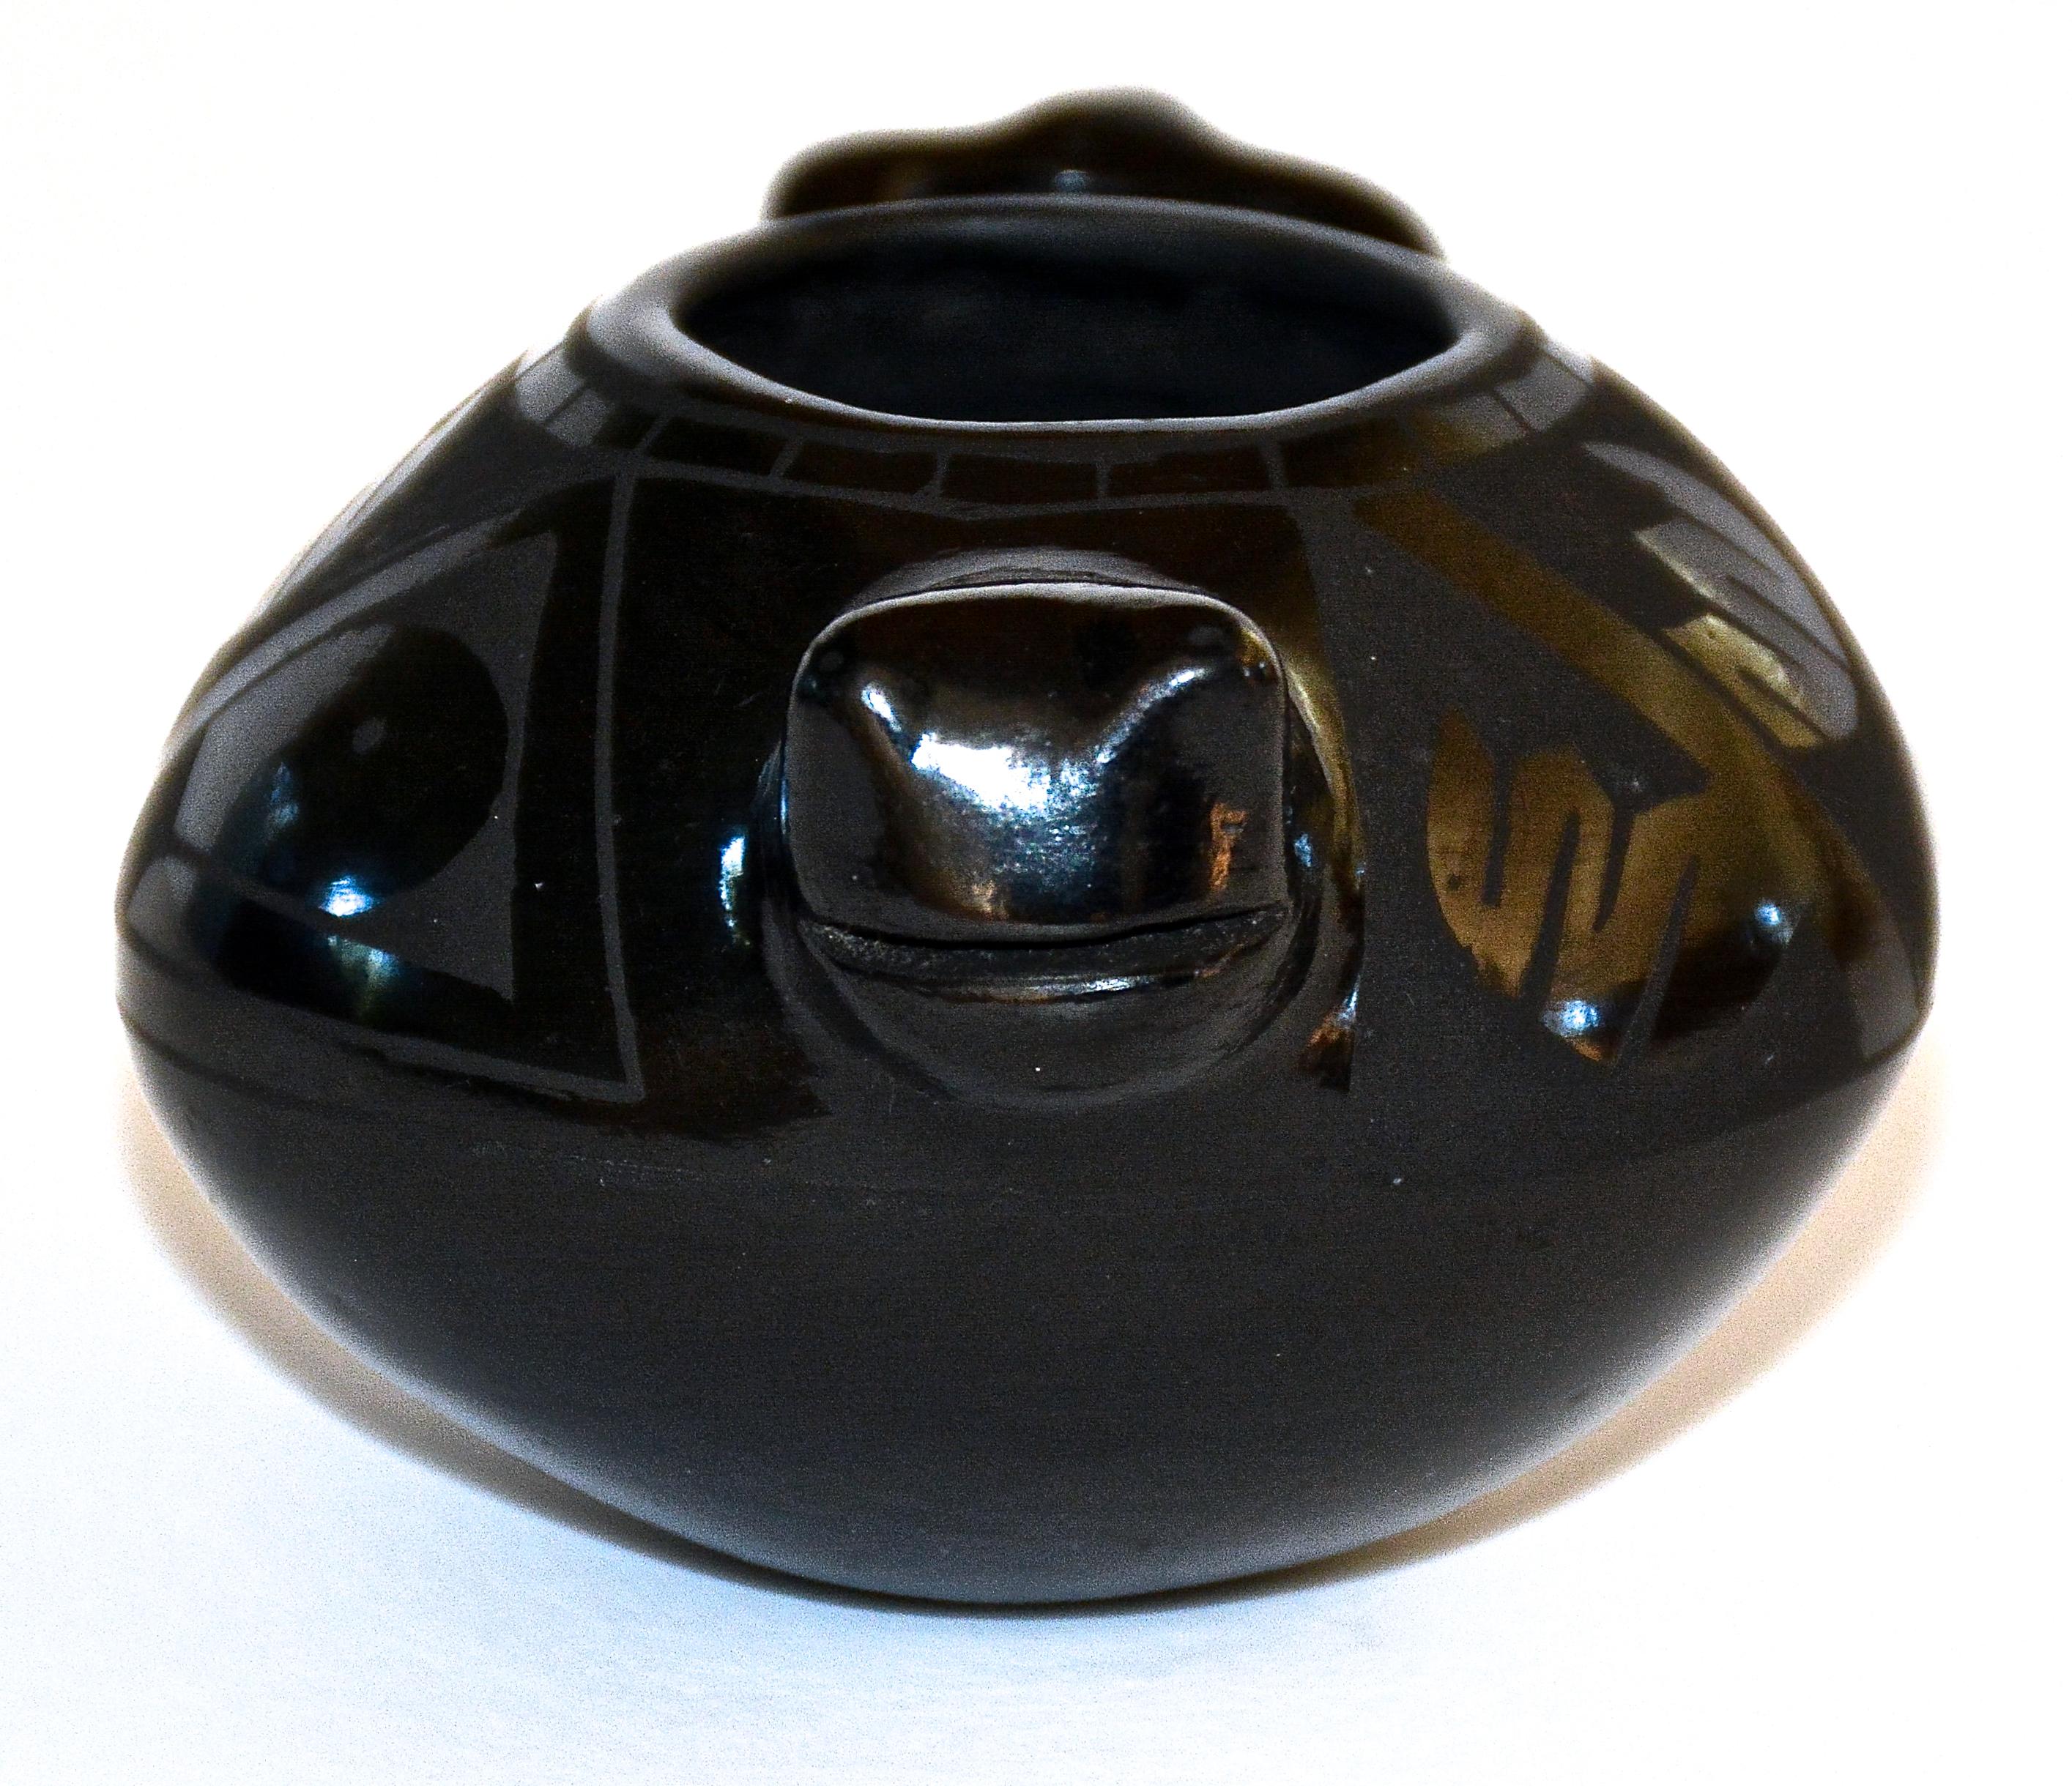 Vintage Mata Ortiz Tadpole Fetish Pot
Cesar Dominguez (b. 1961 - )
1989
Hand-Coiled low fire clay
Mata Ortiz, Chihuahua, Mexico

This miniature Tadpole Fetish Pot is a rare and very early example (1989) from this first generation Mata Ortiz